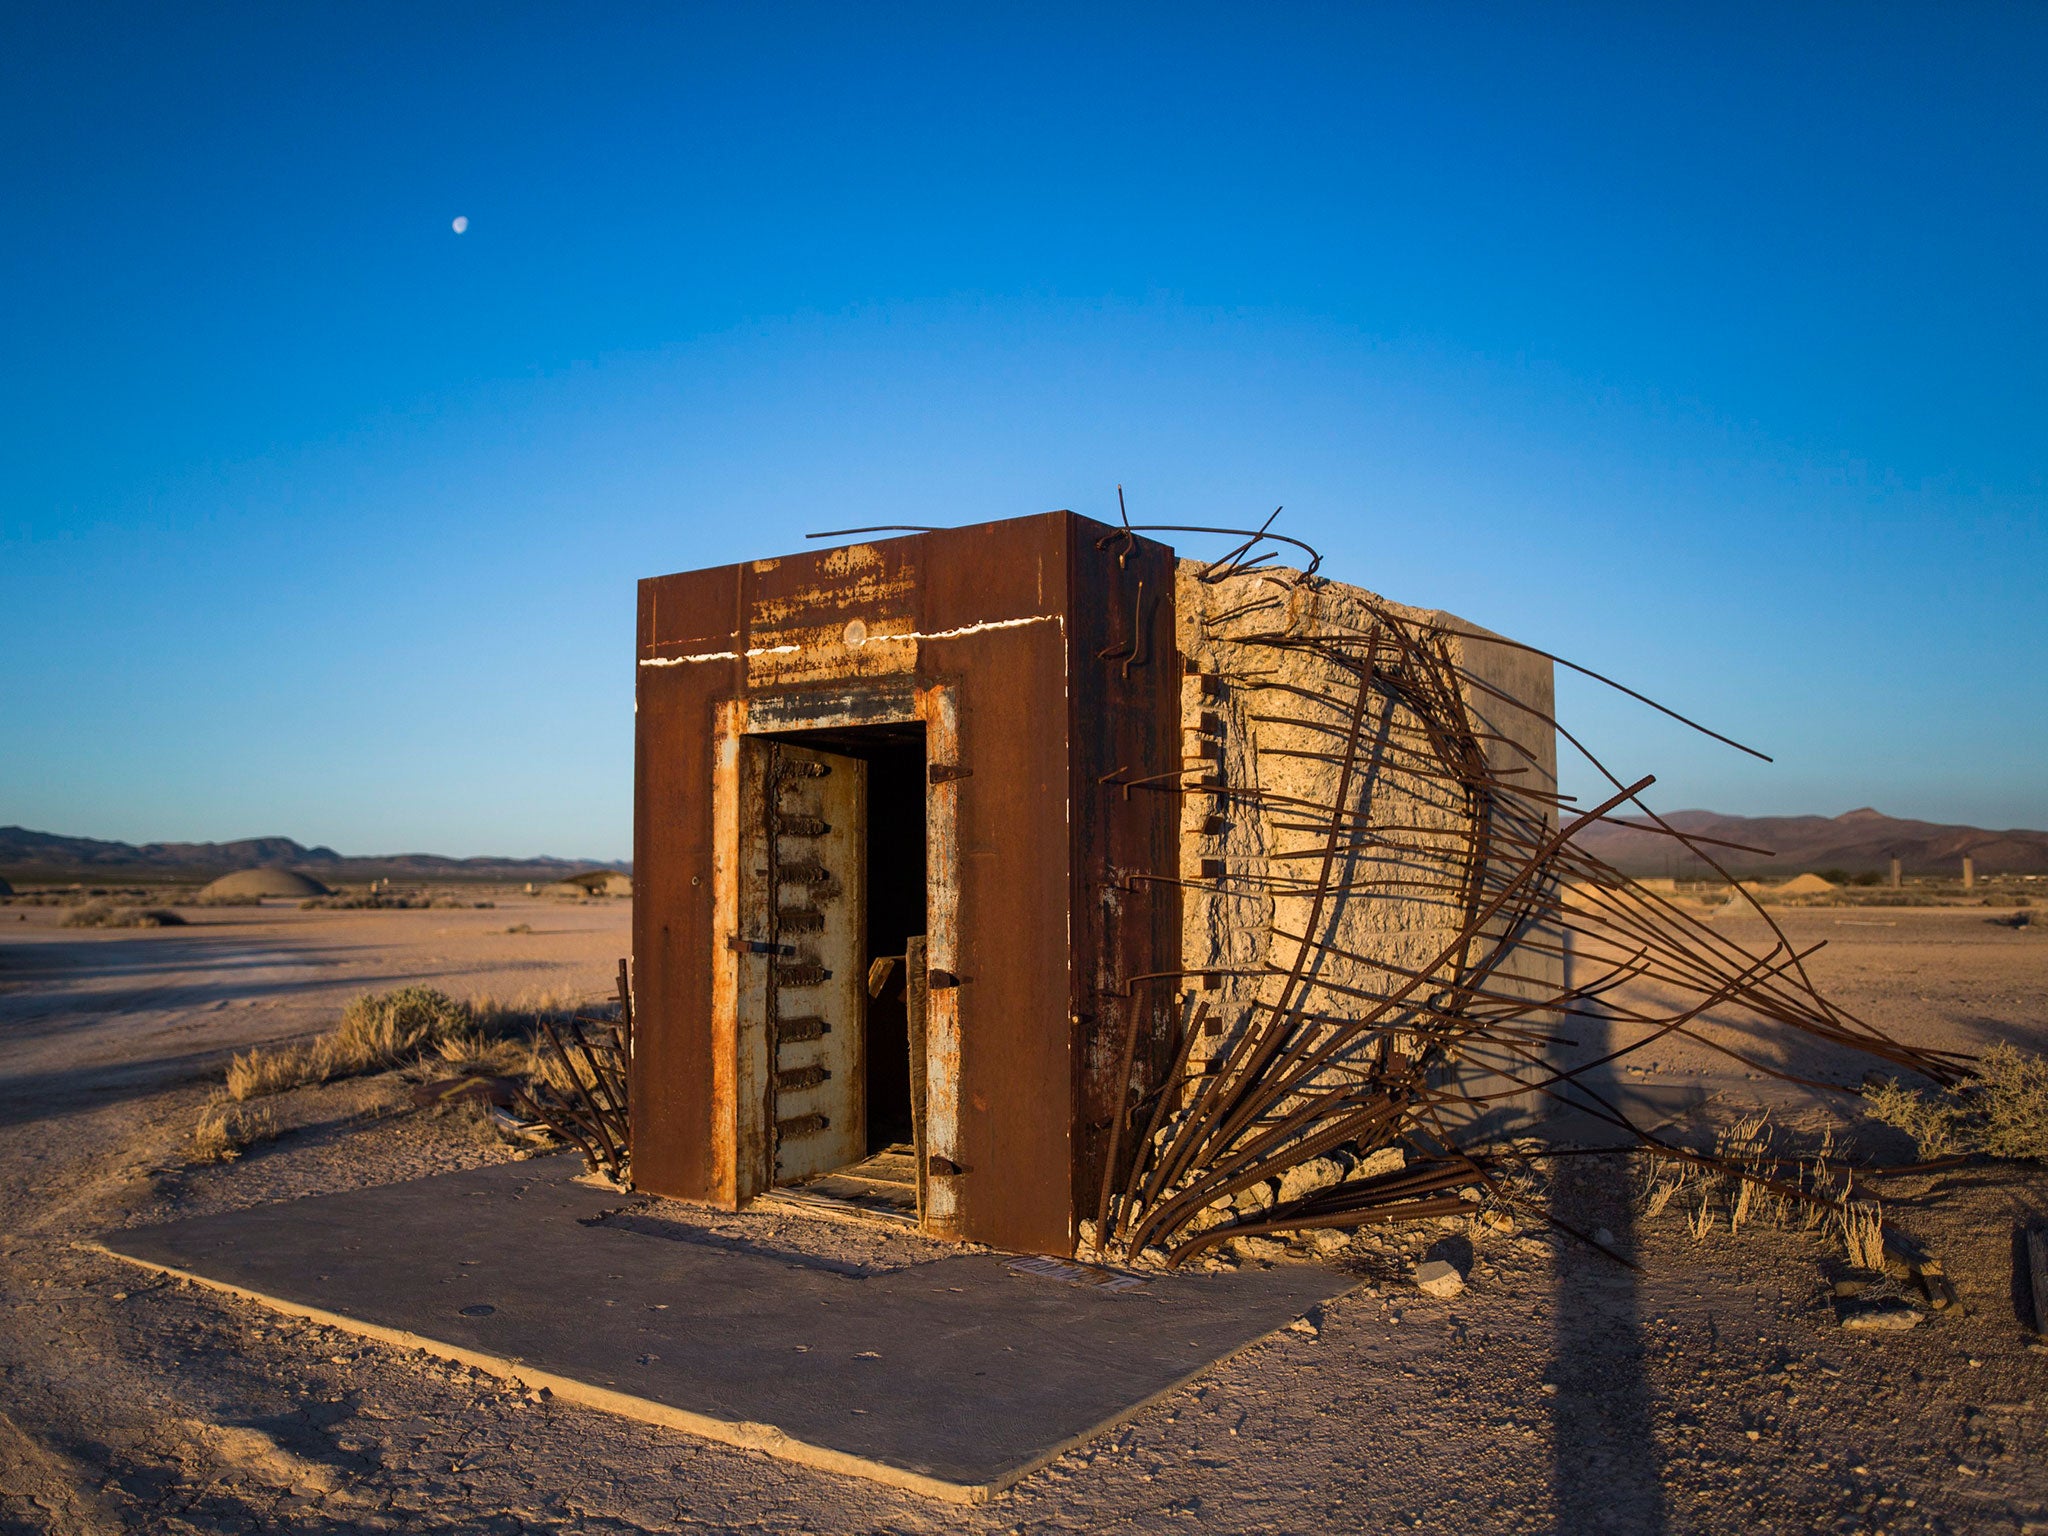 The Mosler bank vault, constructed to determine the effects of nuclear weapons on civil structures, survived a 37-kiloton blast in 1957 at the Nevada National Security Site, 100 miles (160 kilometers) northwest of Las Vegas, Nevada